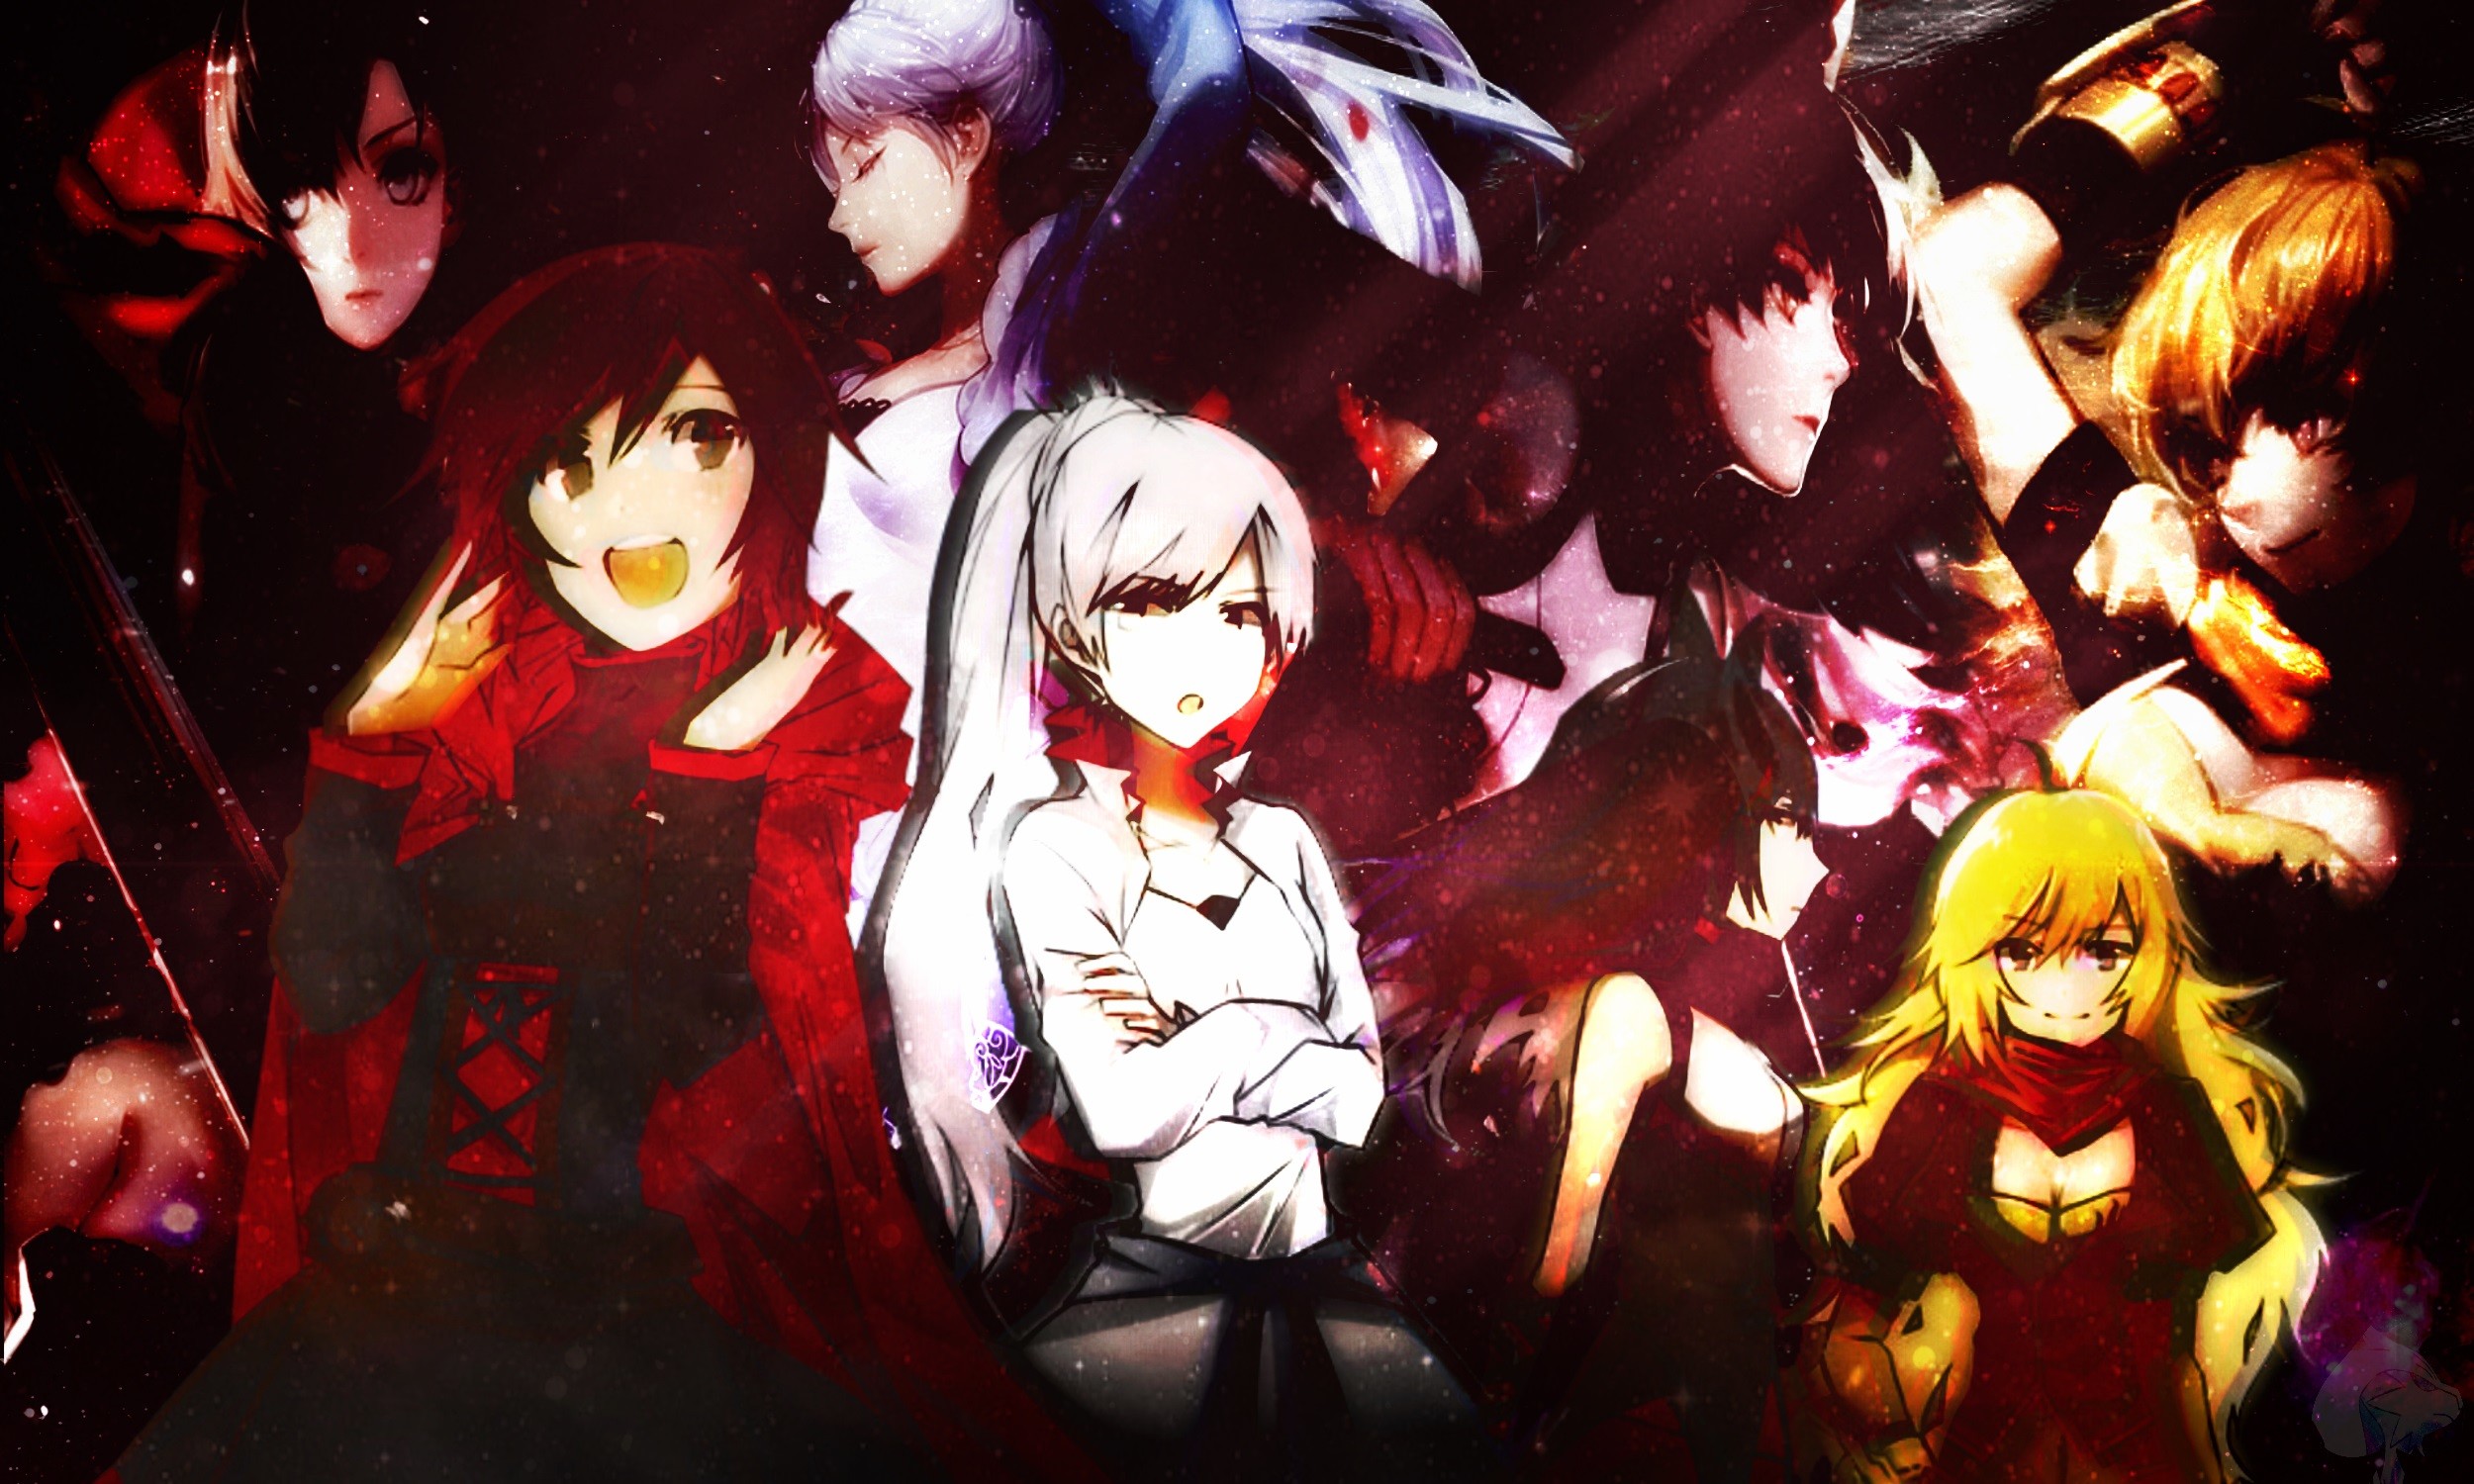 2500x1500 Rwby Wallpaper by Greatace07 Rwby Wallpaper by Greatace07